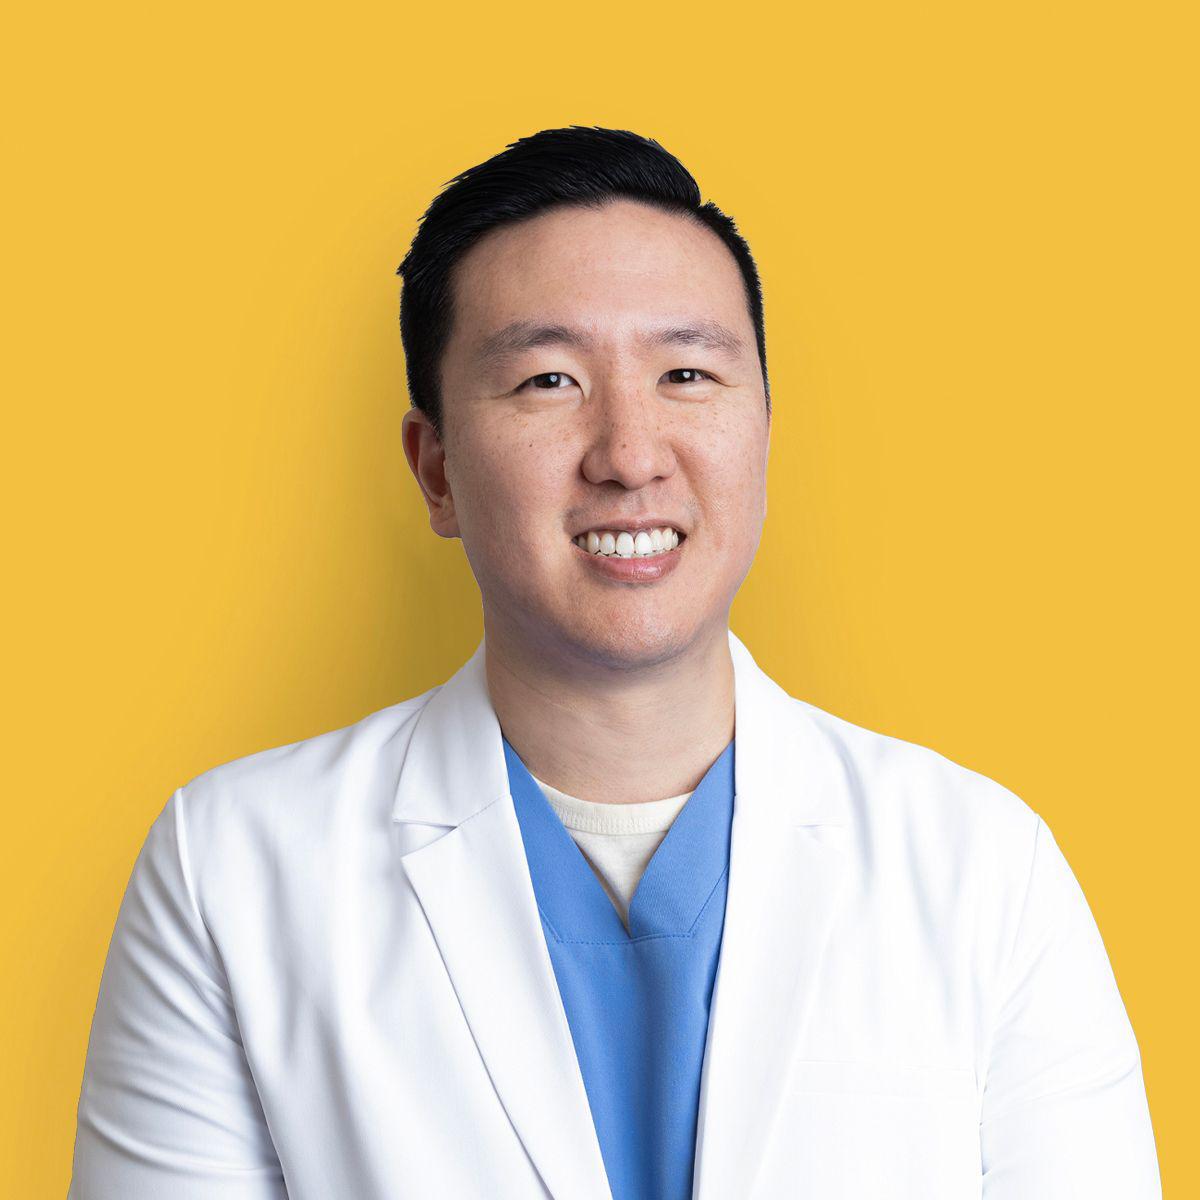 Dr. Daniel Ahn, D.O., is a board-certified physician specializing in the treatment of spider veins and greater vein diseases such as varicose veins and venous insufficiency.